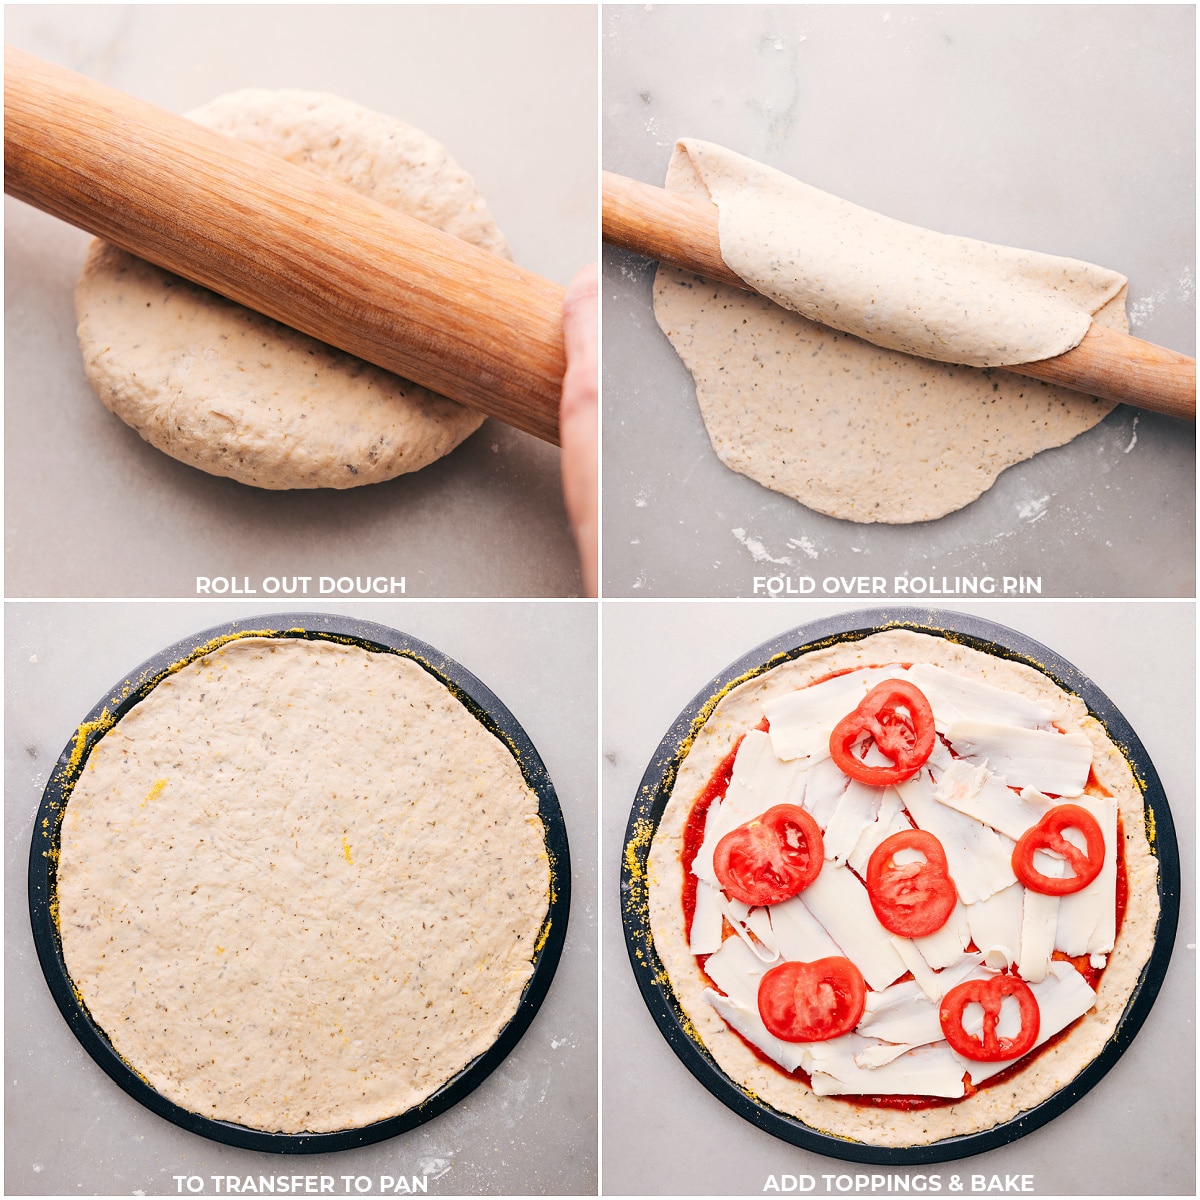 Dough being rolled out with pizza toppings being spread across its surface.